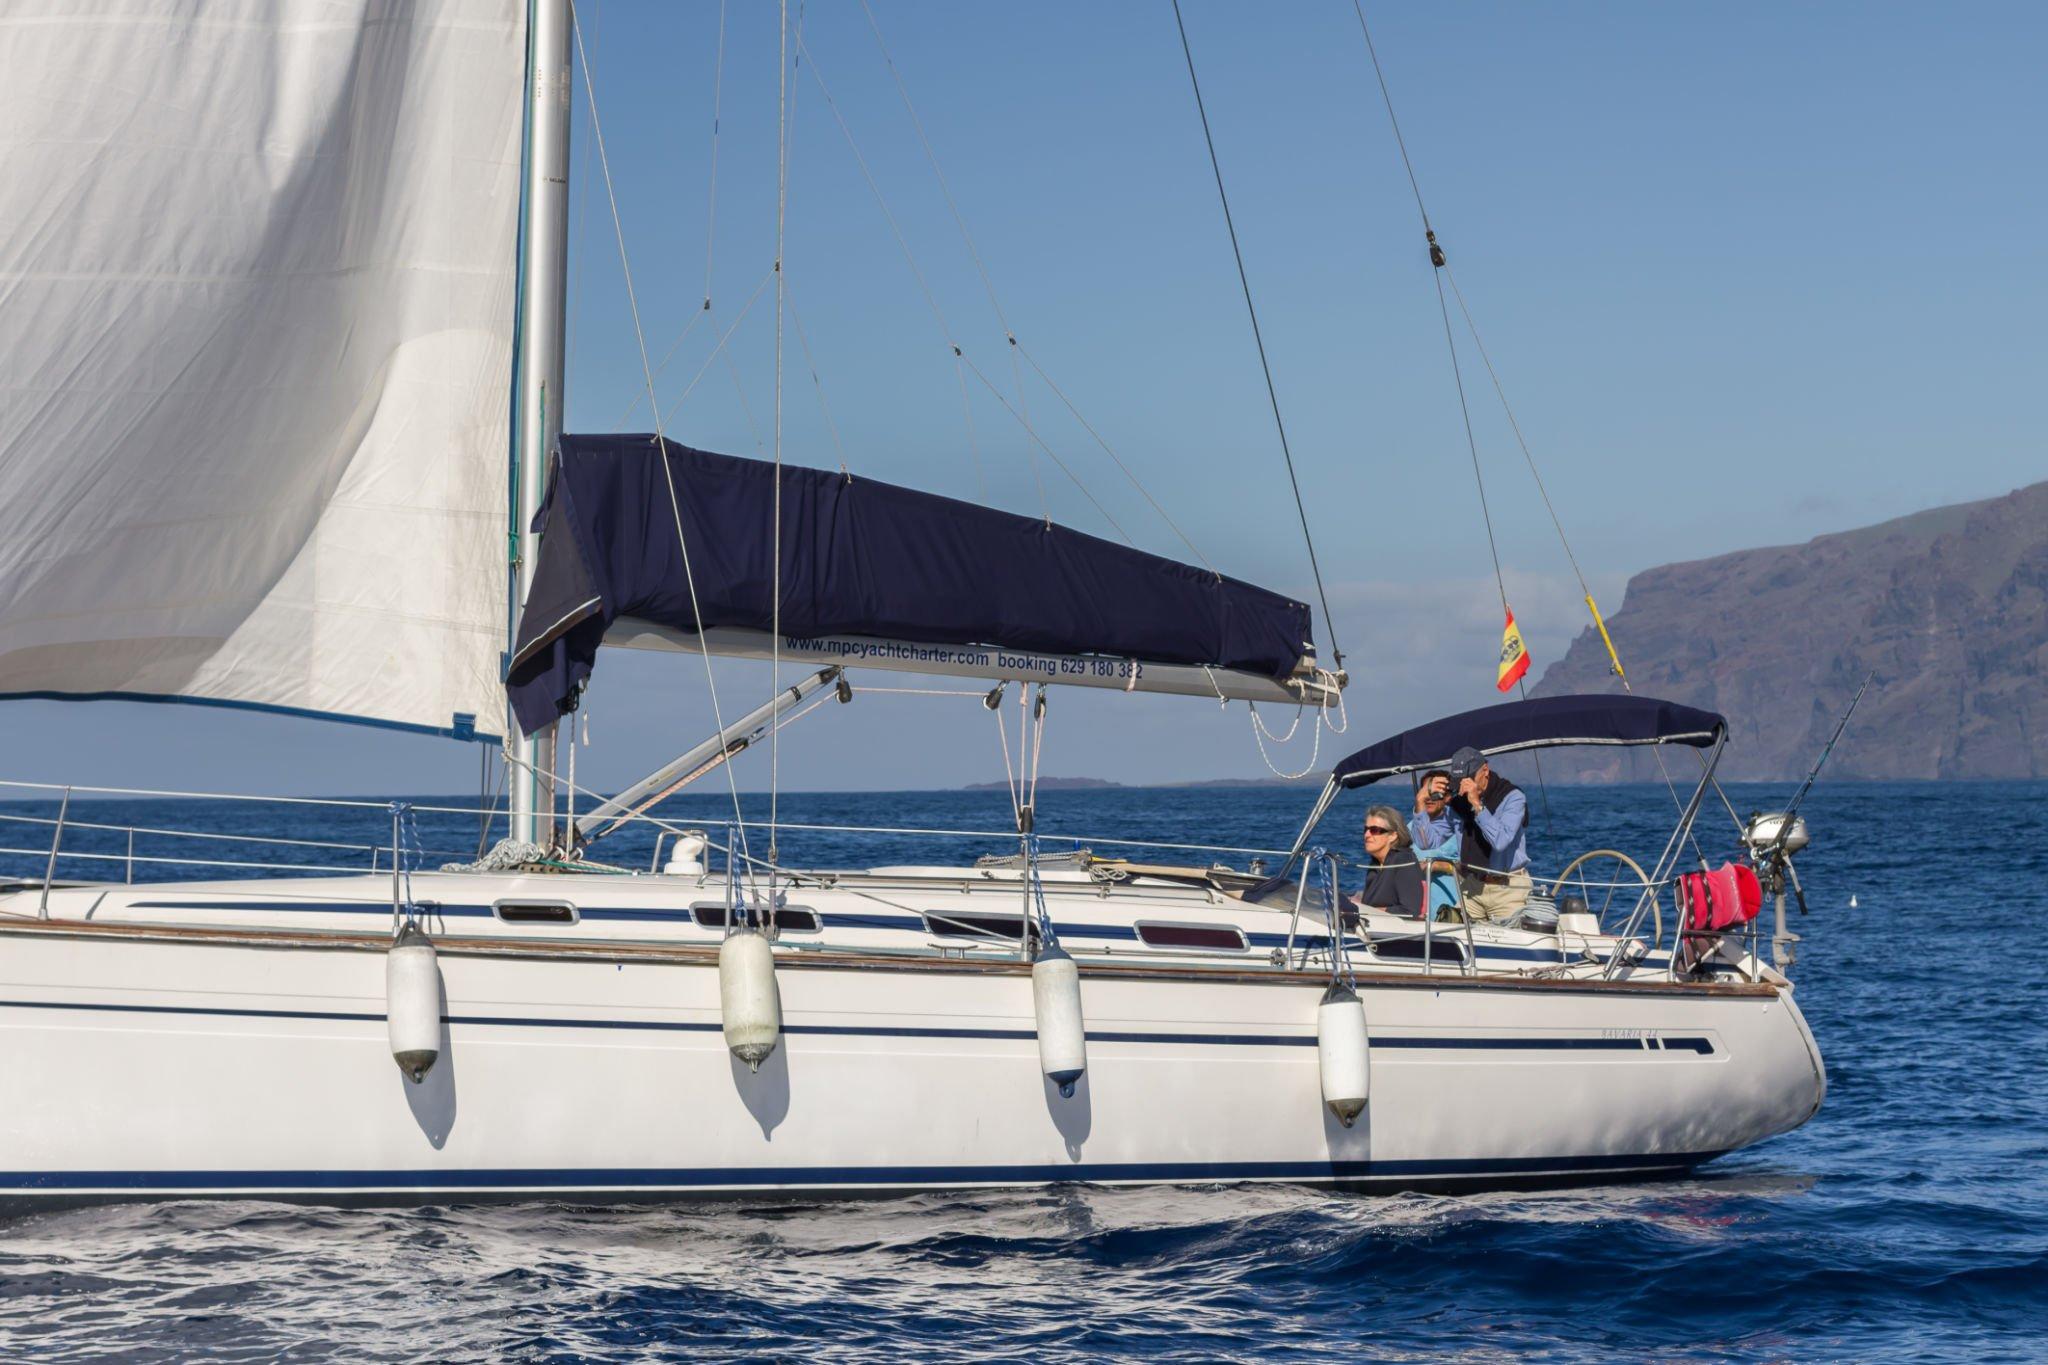 Yacht Charter in Tenerife: The Perfect Getaway on the Water